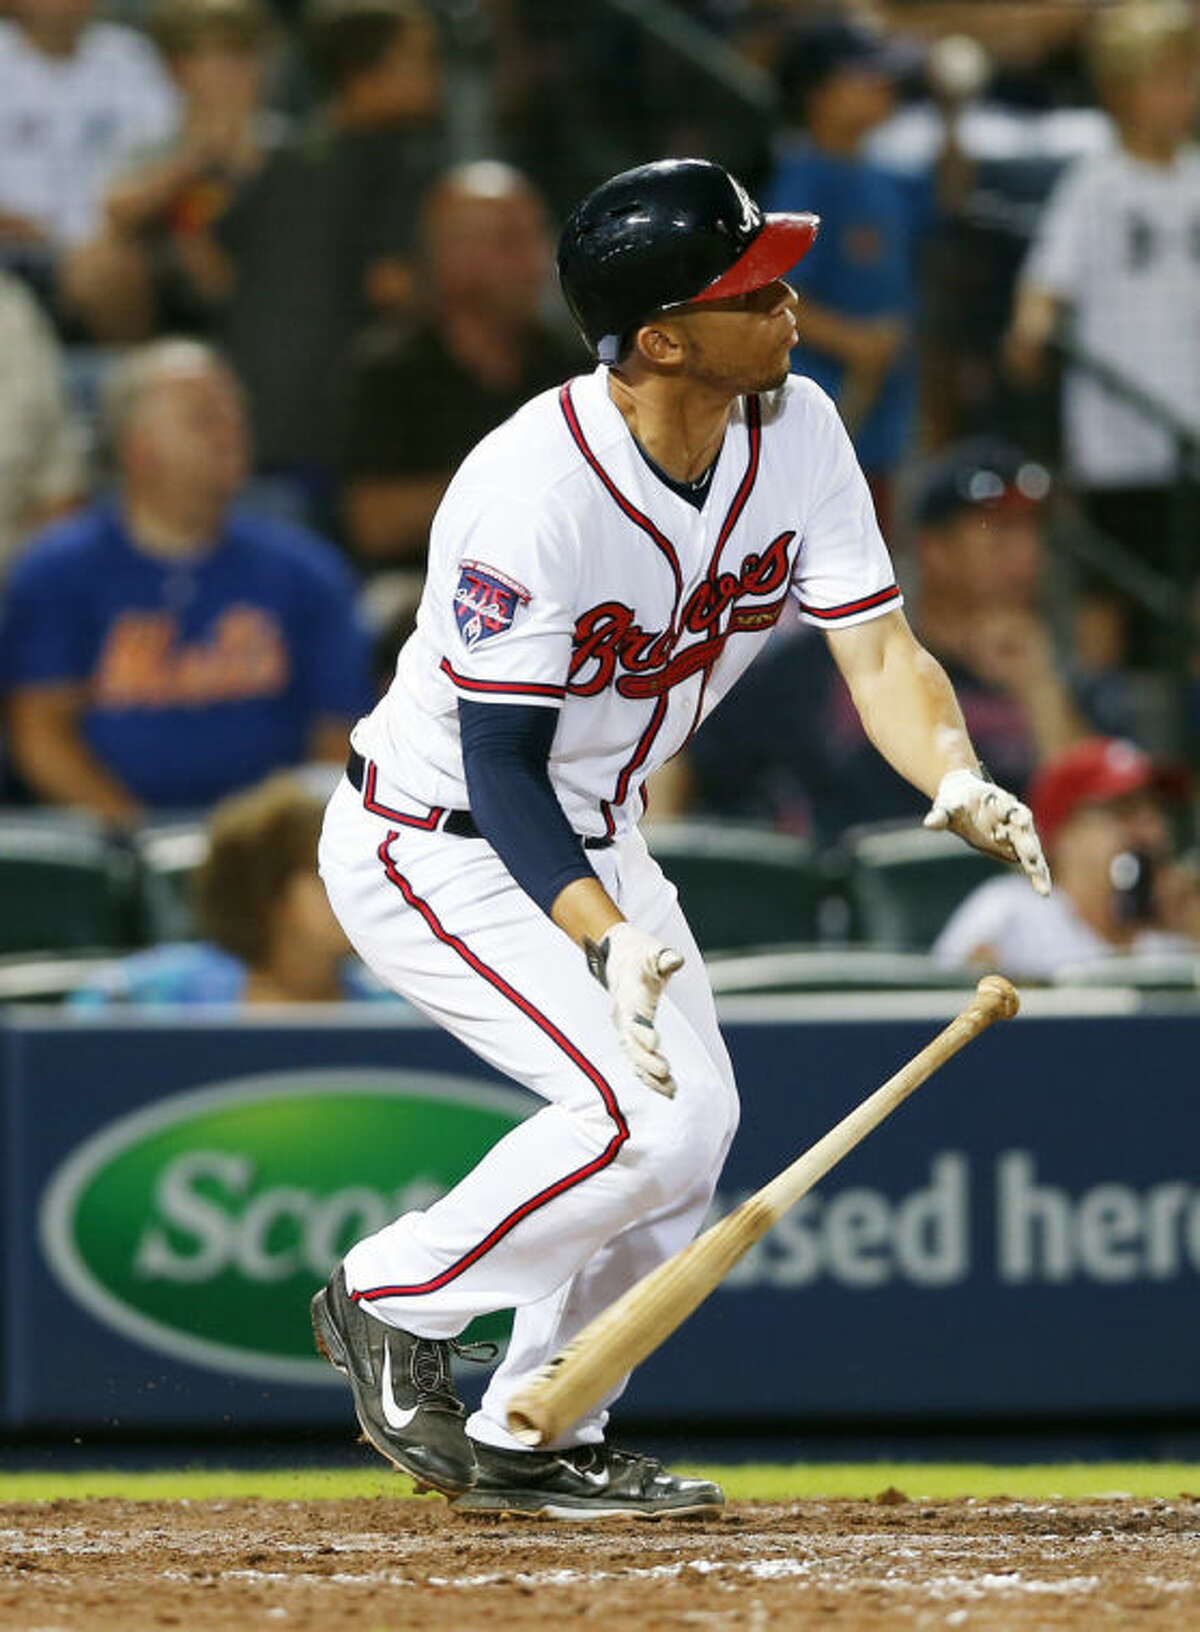 Atlanta Braves' Andrelton Simmons hits a ground ball in the eighth inning of a baseball game against the New York Mets in Atlanta, Monday, June 30, 2014. New York Mets third baseman Eric Campbell was charged with an error allowing the go-head run to score. Atlanta won 5-3. (AP Photo/John Bazemore)